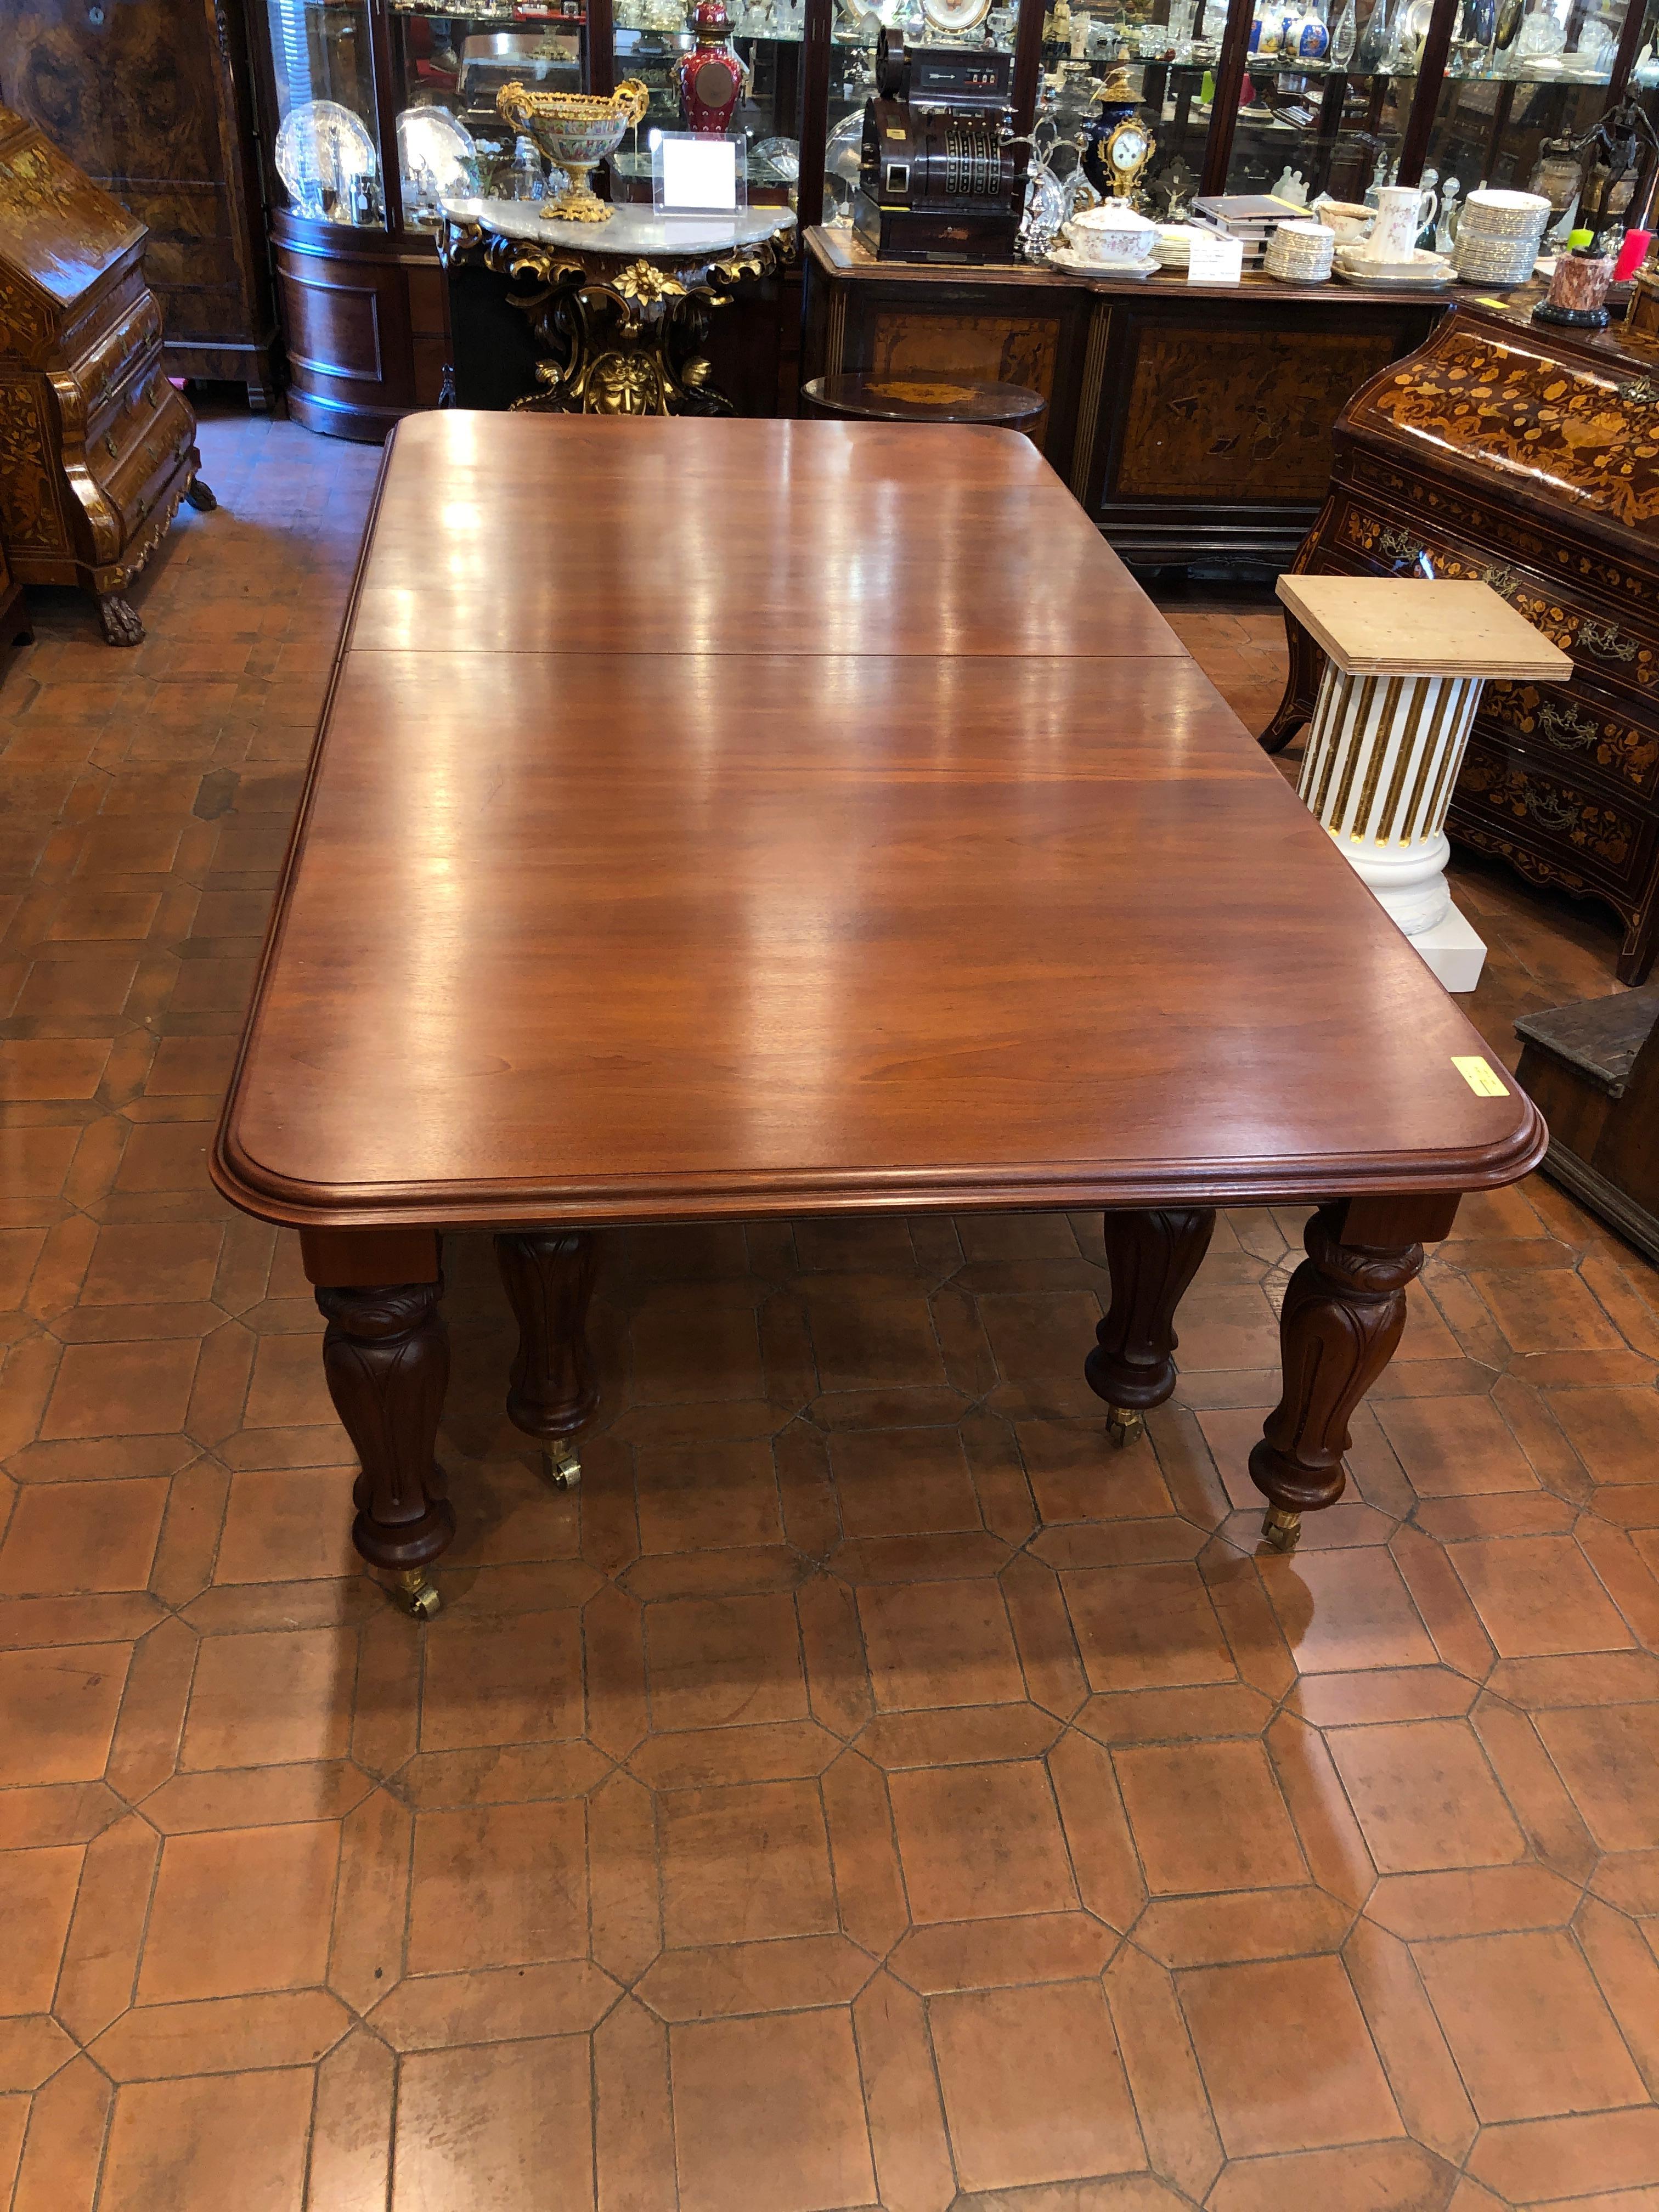 Monumental extendable English table, late Victorian period, circa 1900, extendable up to 10.90m with double screw mechanism on both sides, available an extension (of reproduction), if you can add another 15. (Each of them is about 50 cm). The table